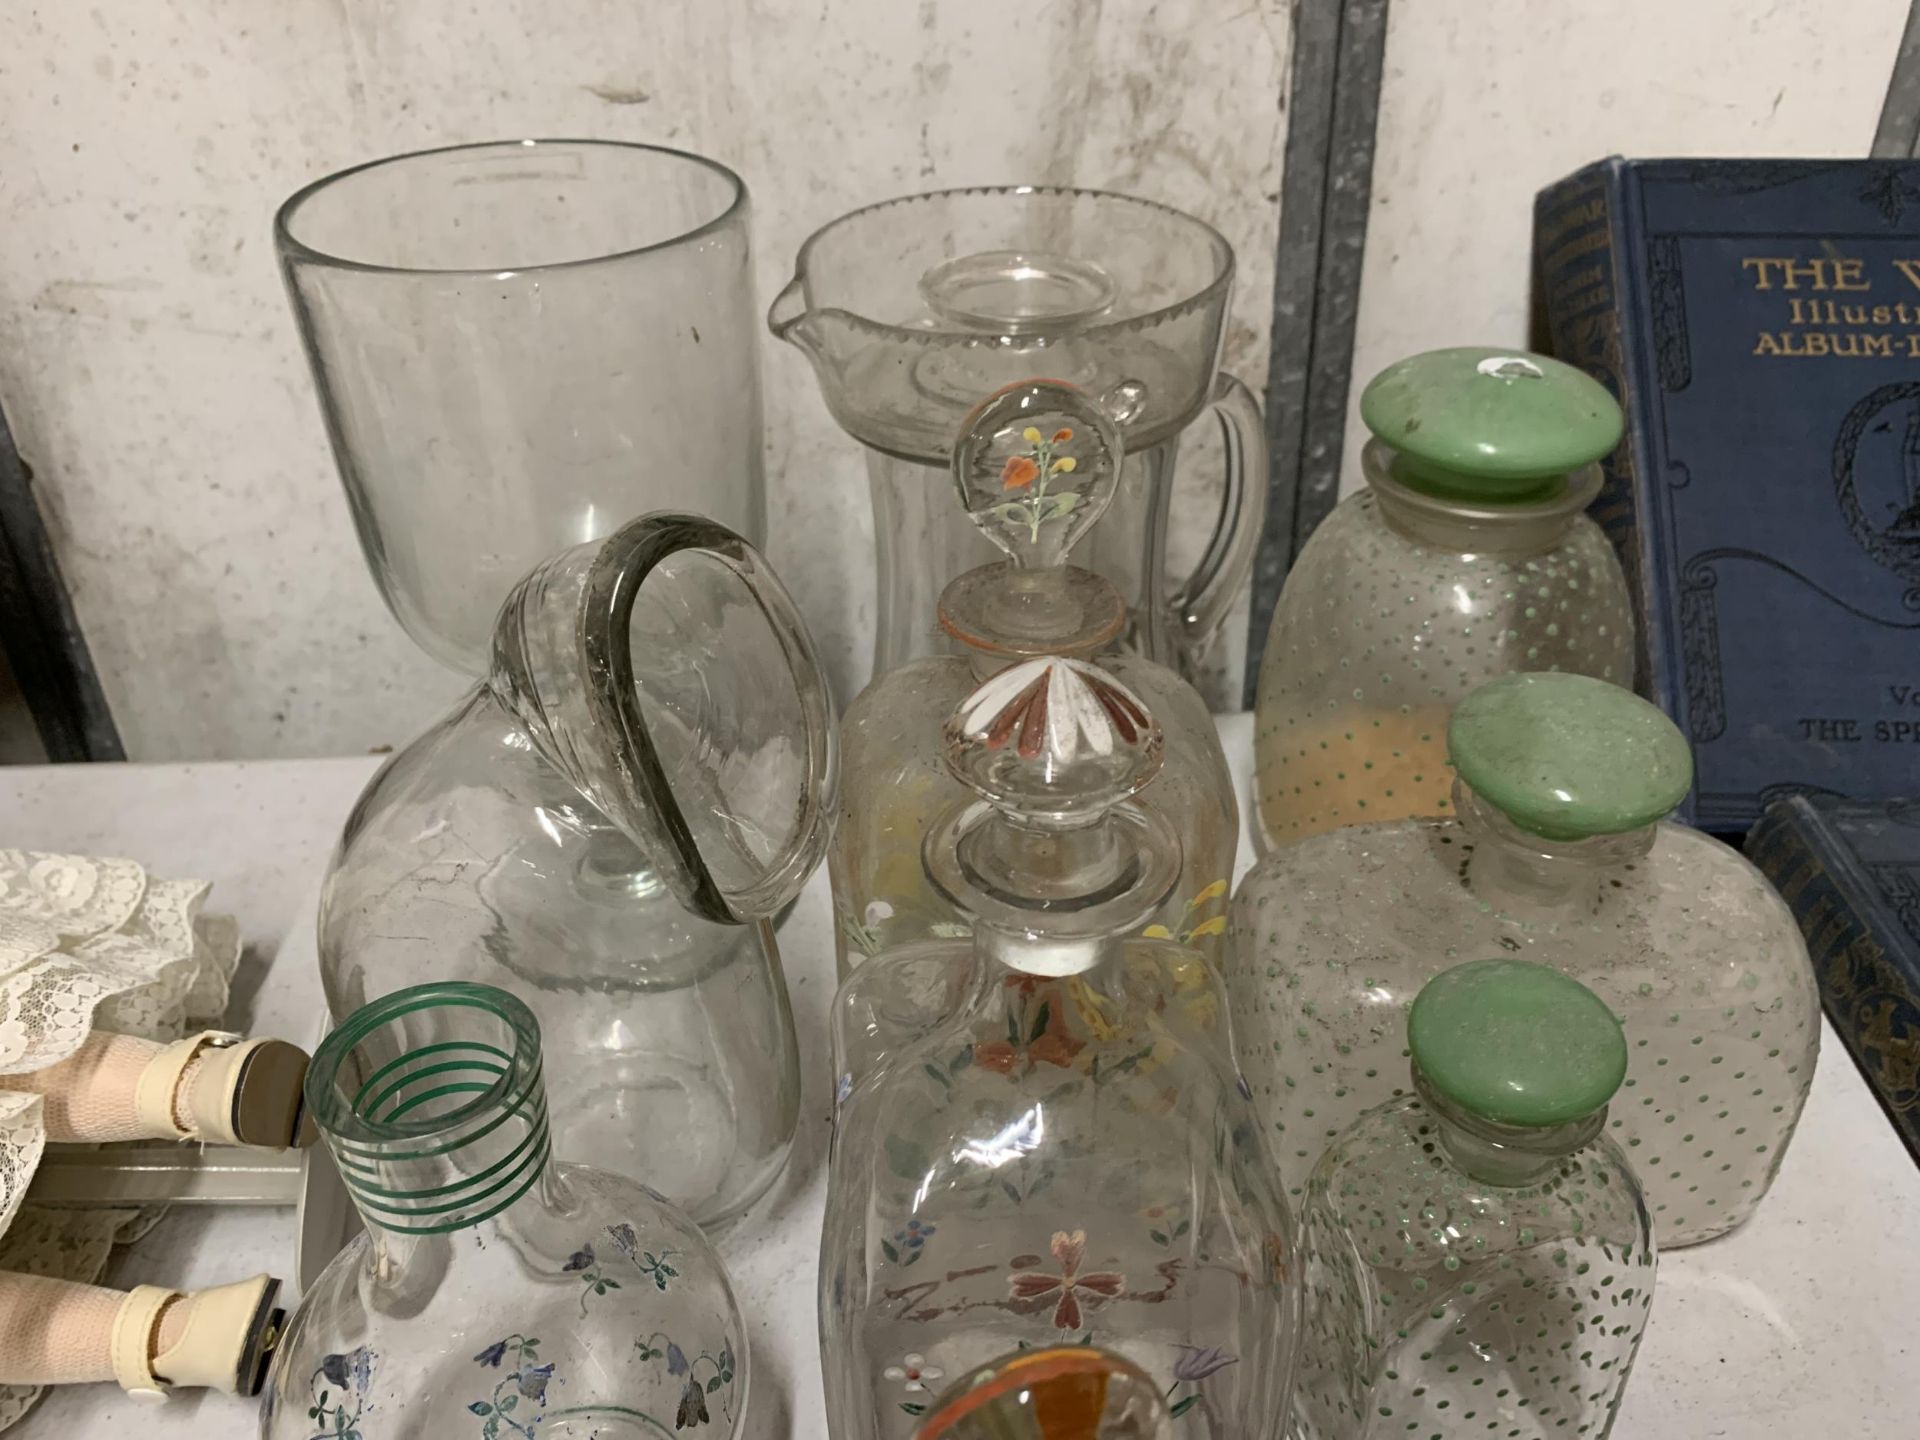 A QUANTITY OF VINTAGE GLASSWARE TO INCLUDE HANDPAINTED DECANTERS, JARS, JUGS, CANDLE HOLDER, ETC - Image 3 of 3